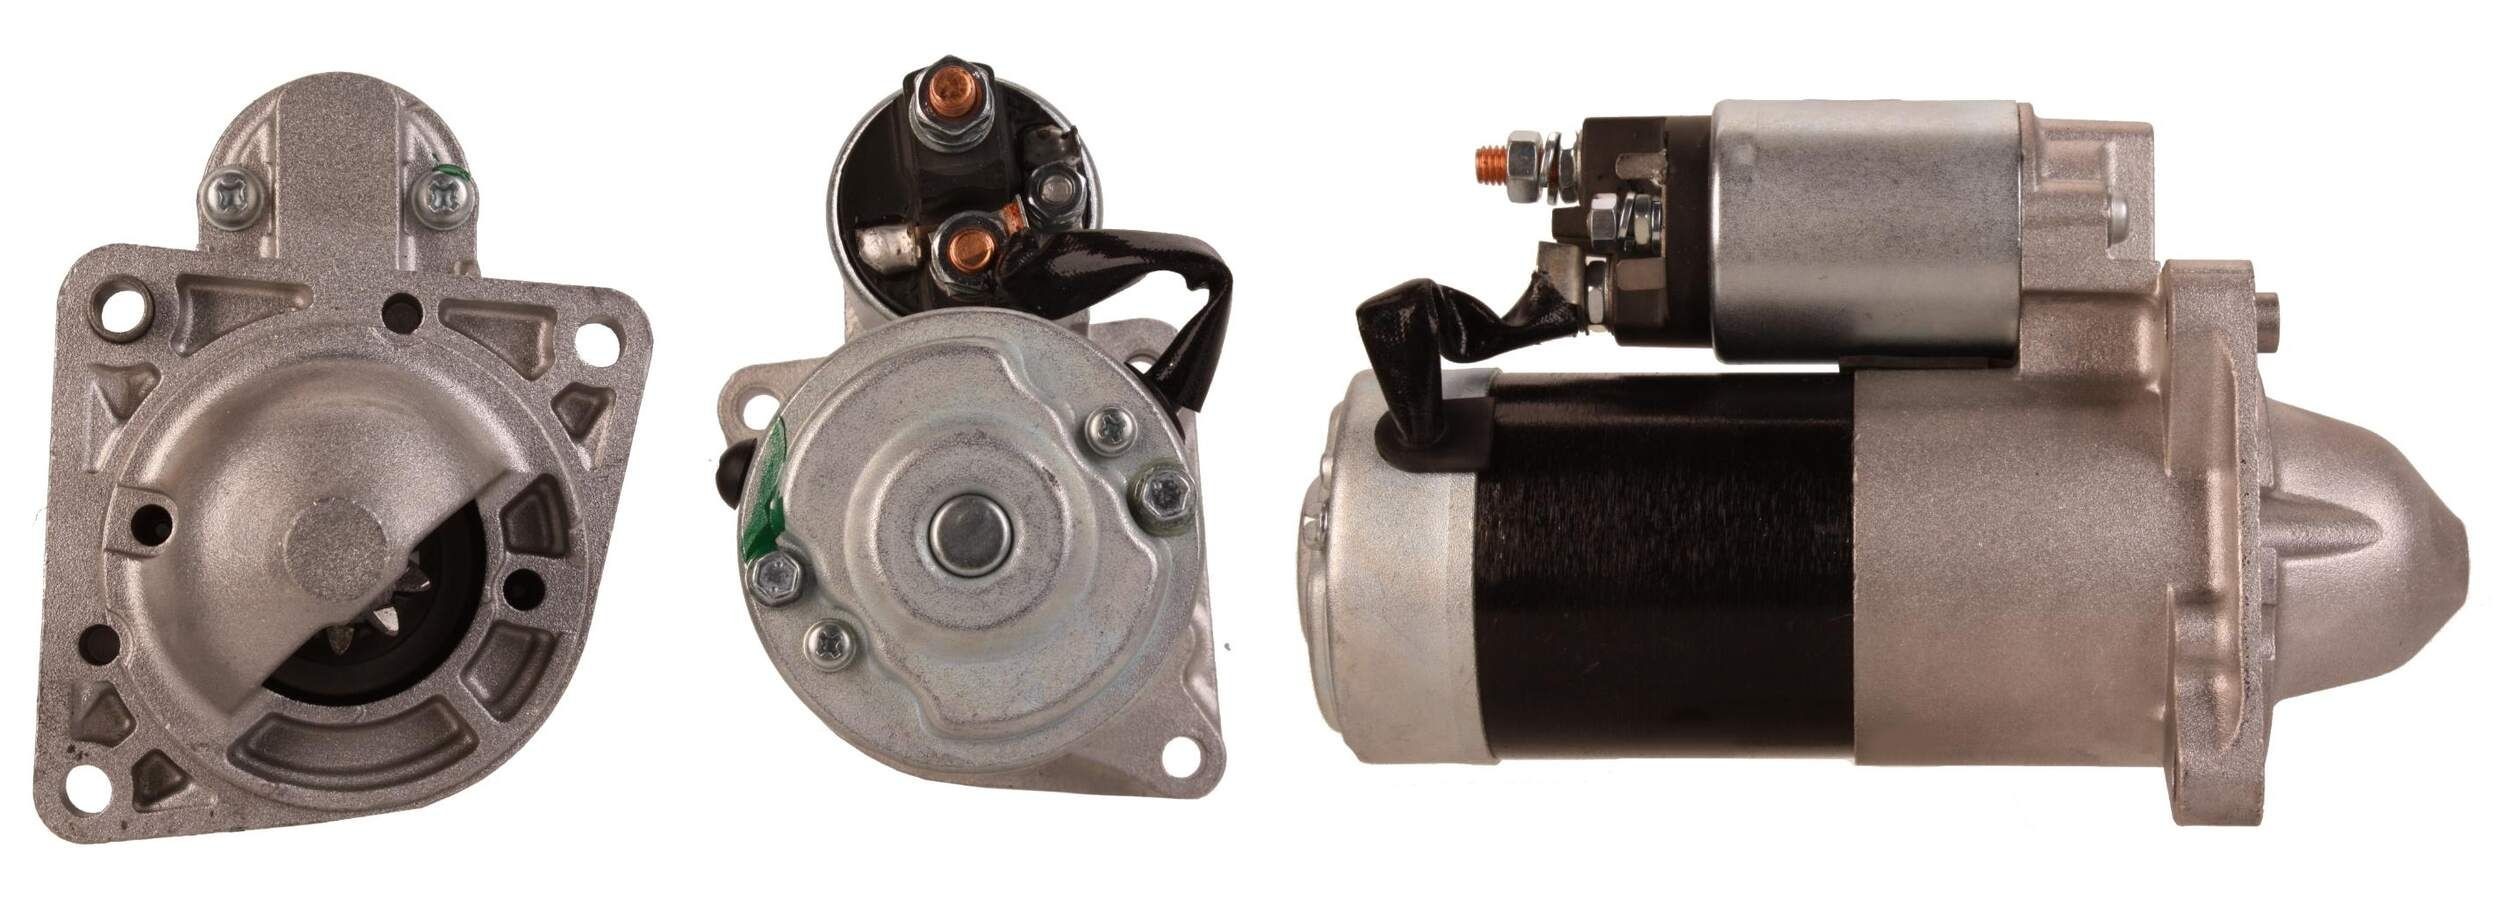 ELSTOCK 25-3454 Starter motor SAAB experience and price